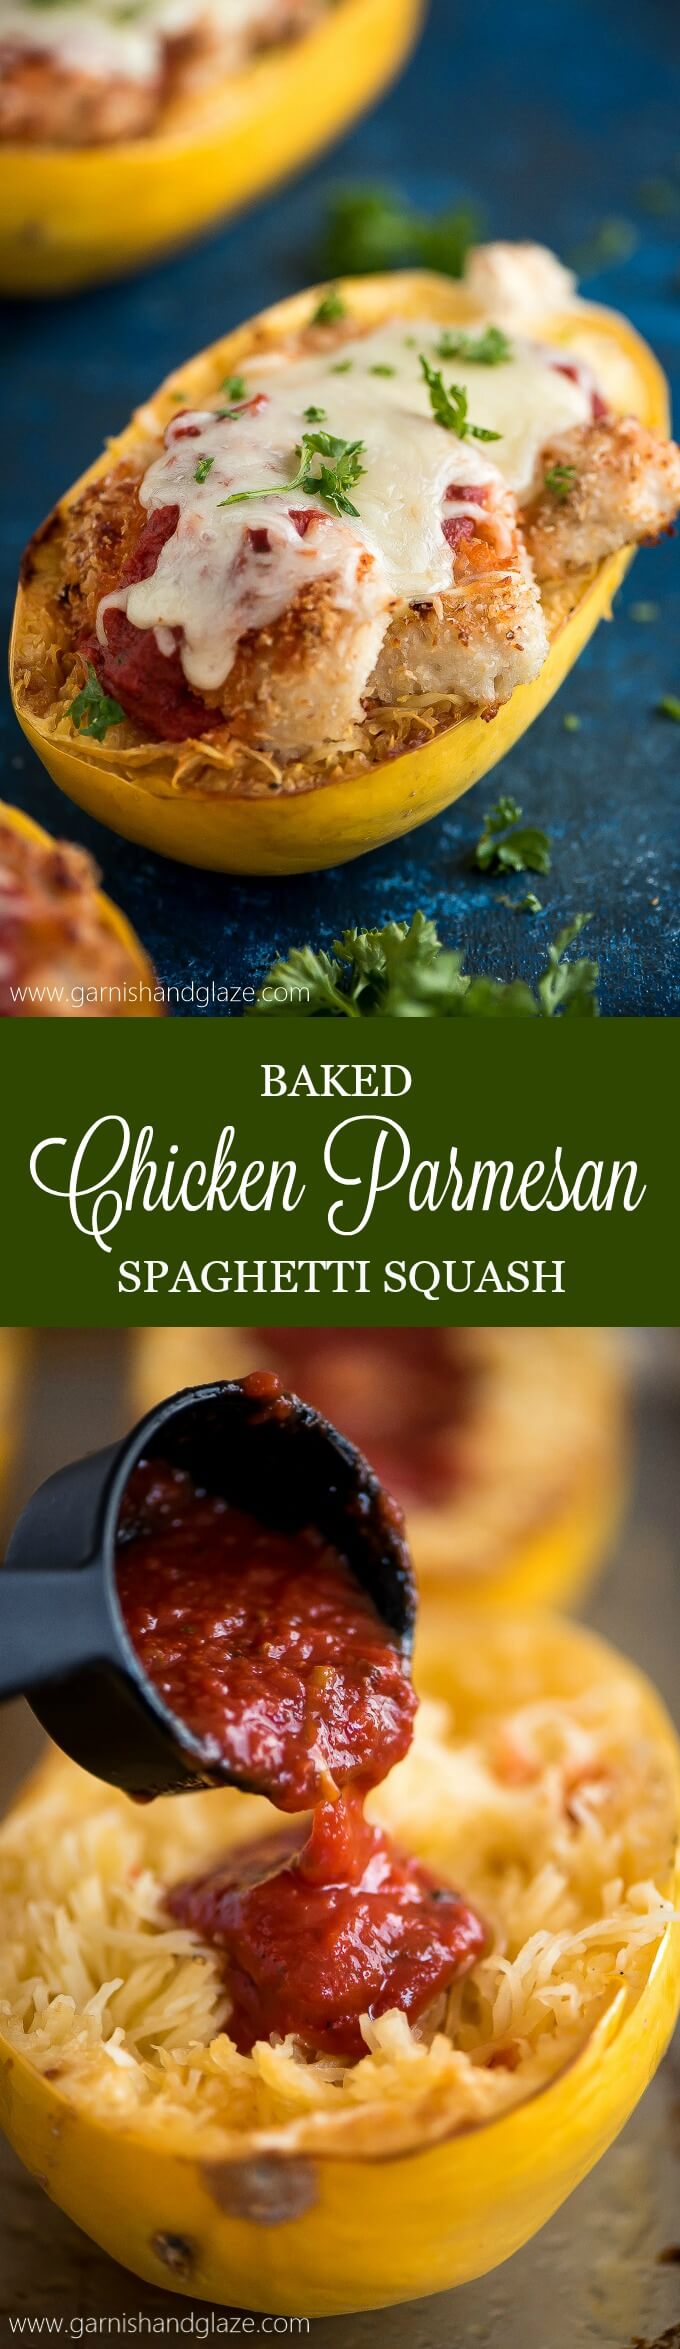 Make a smart swap and cook up some Baked Chicken Parmesan Spaghetti Squash for a healthier dinner with the same great taste and crispy texture. Repin for a chance to see a similar meal in your freezer aisle @smartmade0201 @AOL_Lifestyle #ad #SmartMade #InspiredByYou